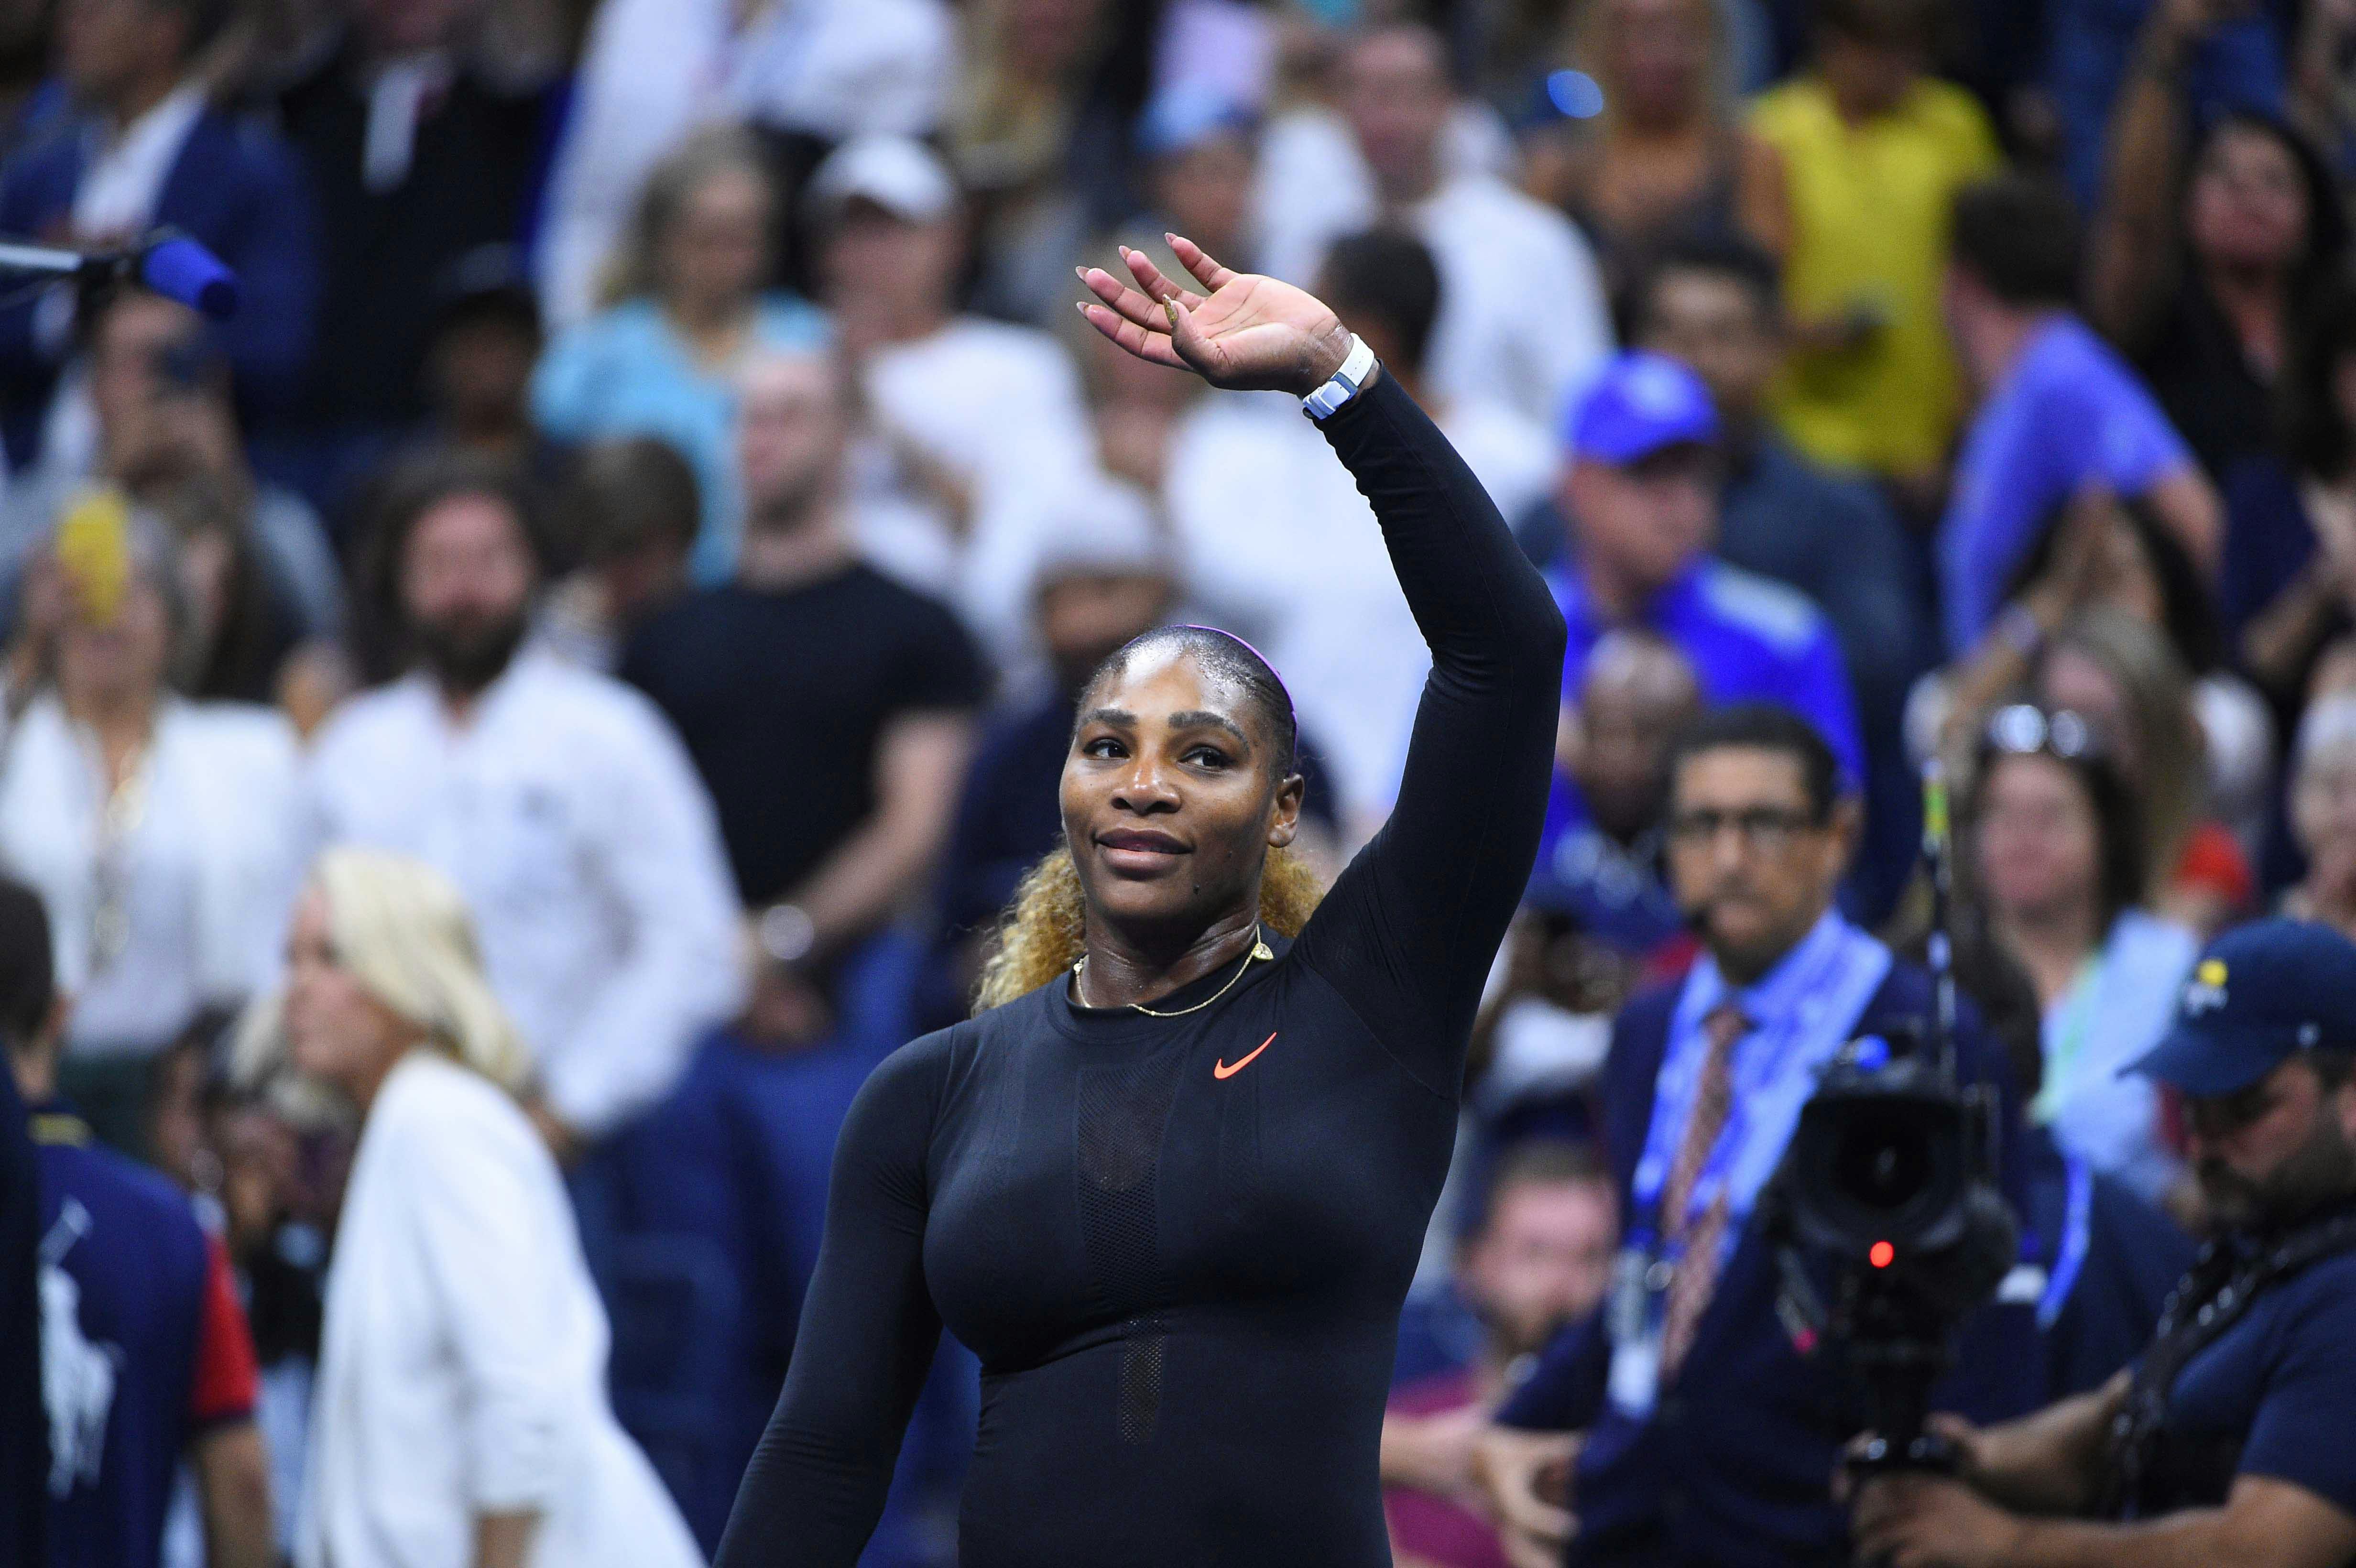 Serena Williams waving to the crowd after her win against Maria Sharapova at the US Open 2019